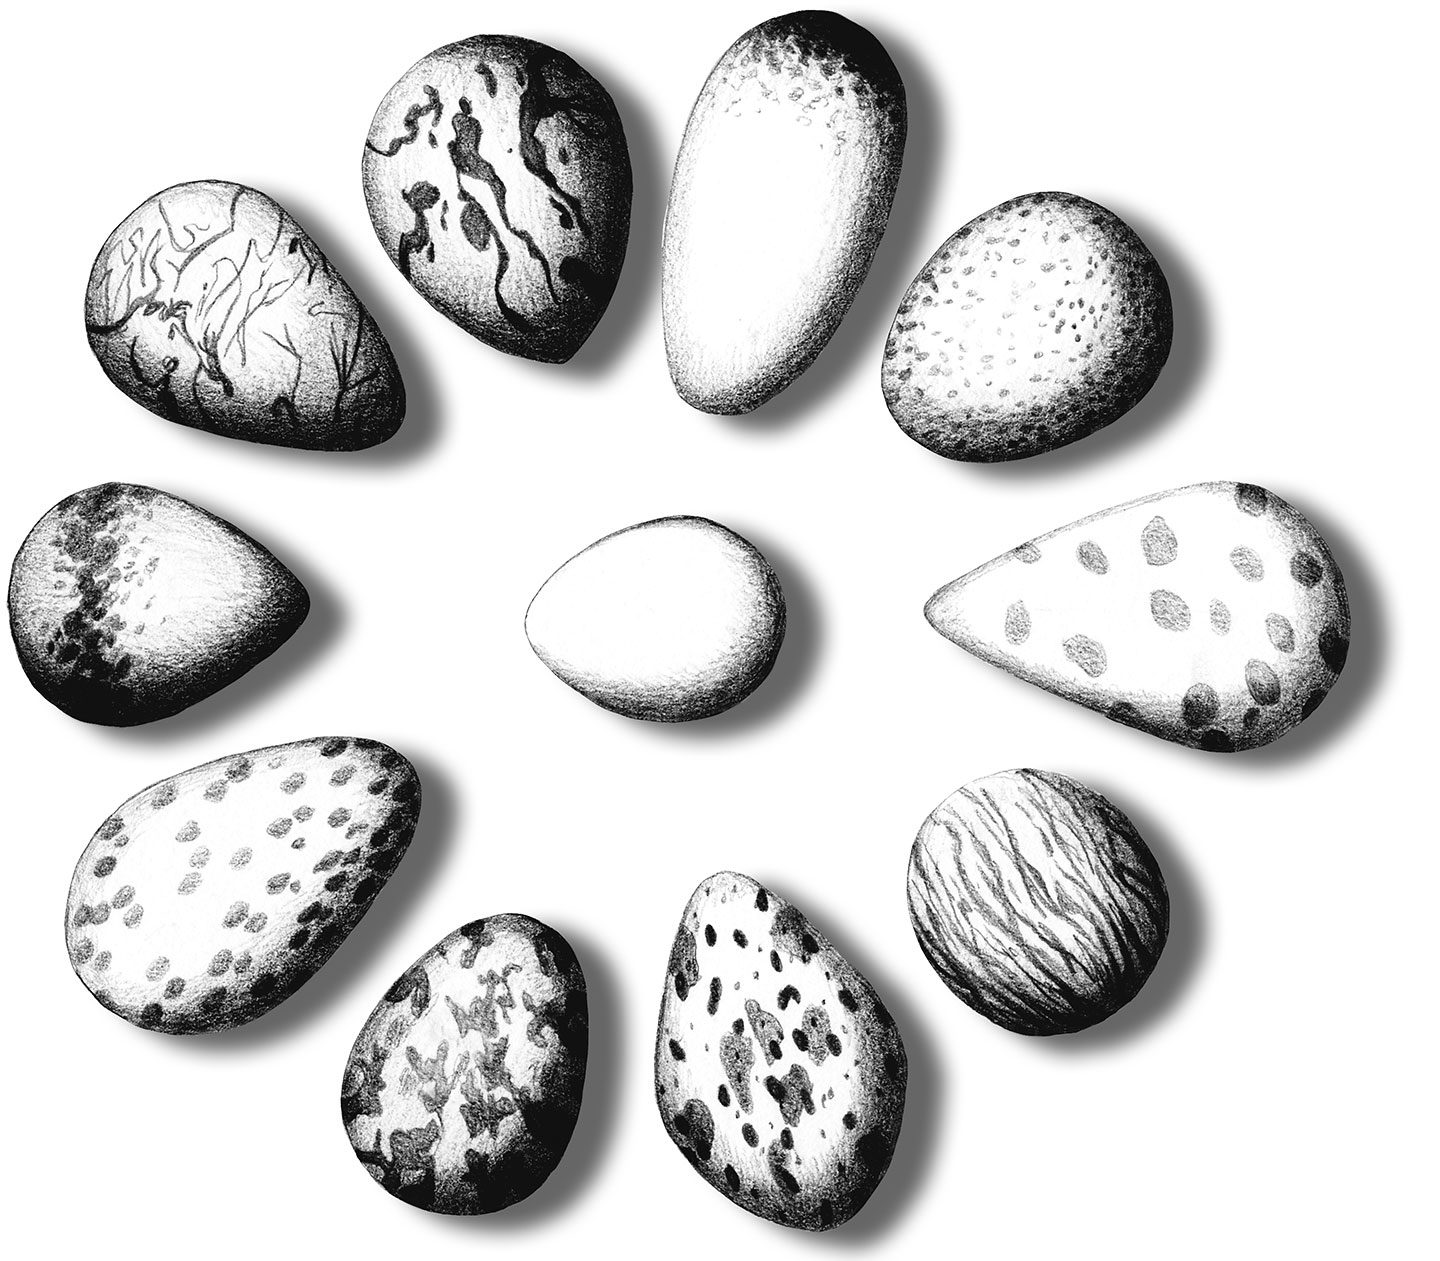 Bird eggs from various species can be pigmented in a variety of patterns, including spots, blotches, scrawls, and streaks. Illustration by Katherine A. Smith.